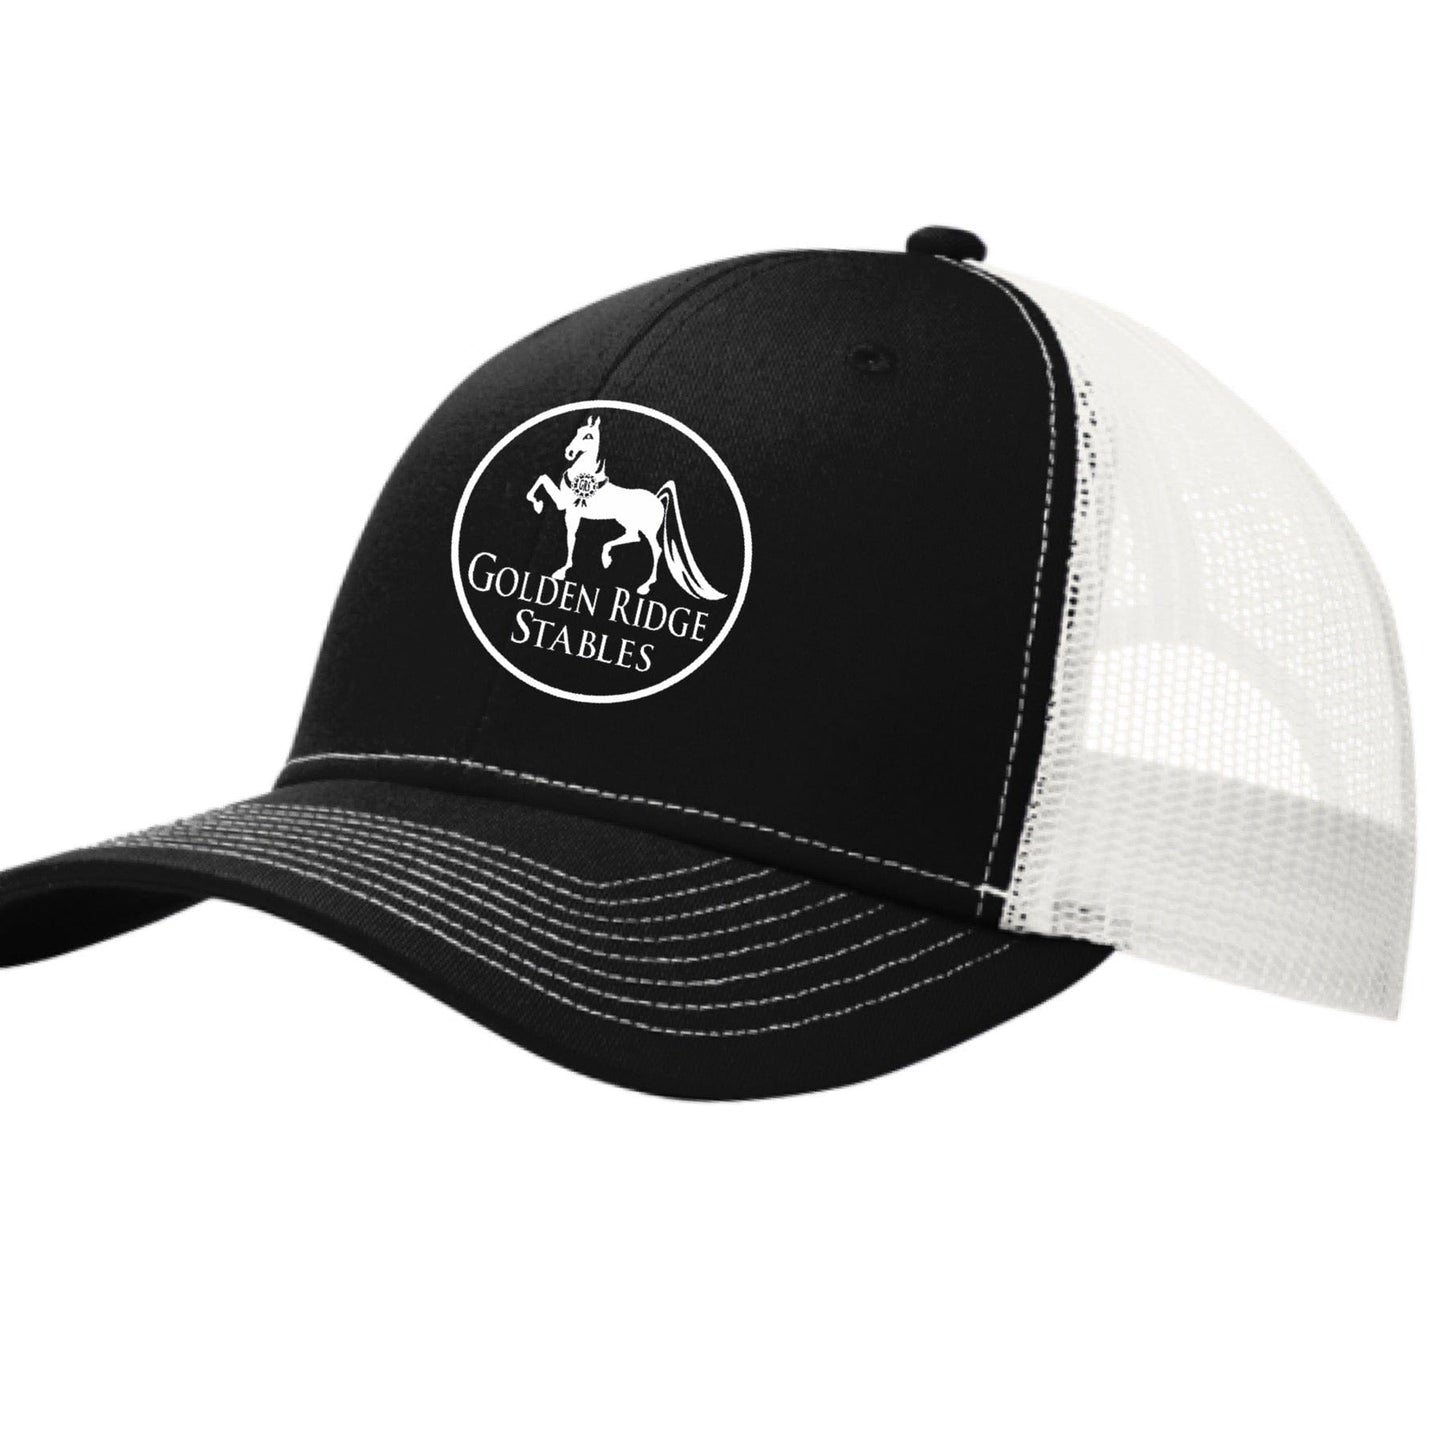 Equestrian Team Apparel Golden Ridge Stables Trucker Cap equestrian team apparel online tack store mobile tack store custom farm apparel custom show stable clothing equestrian lifestyle horse show clothing riding clothes horses equestrian tack store